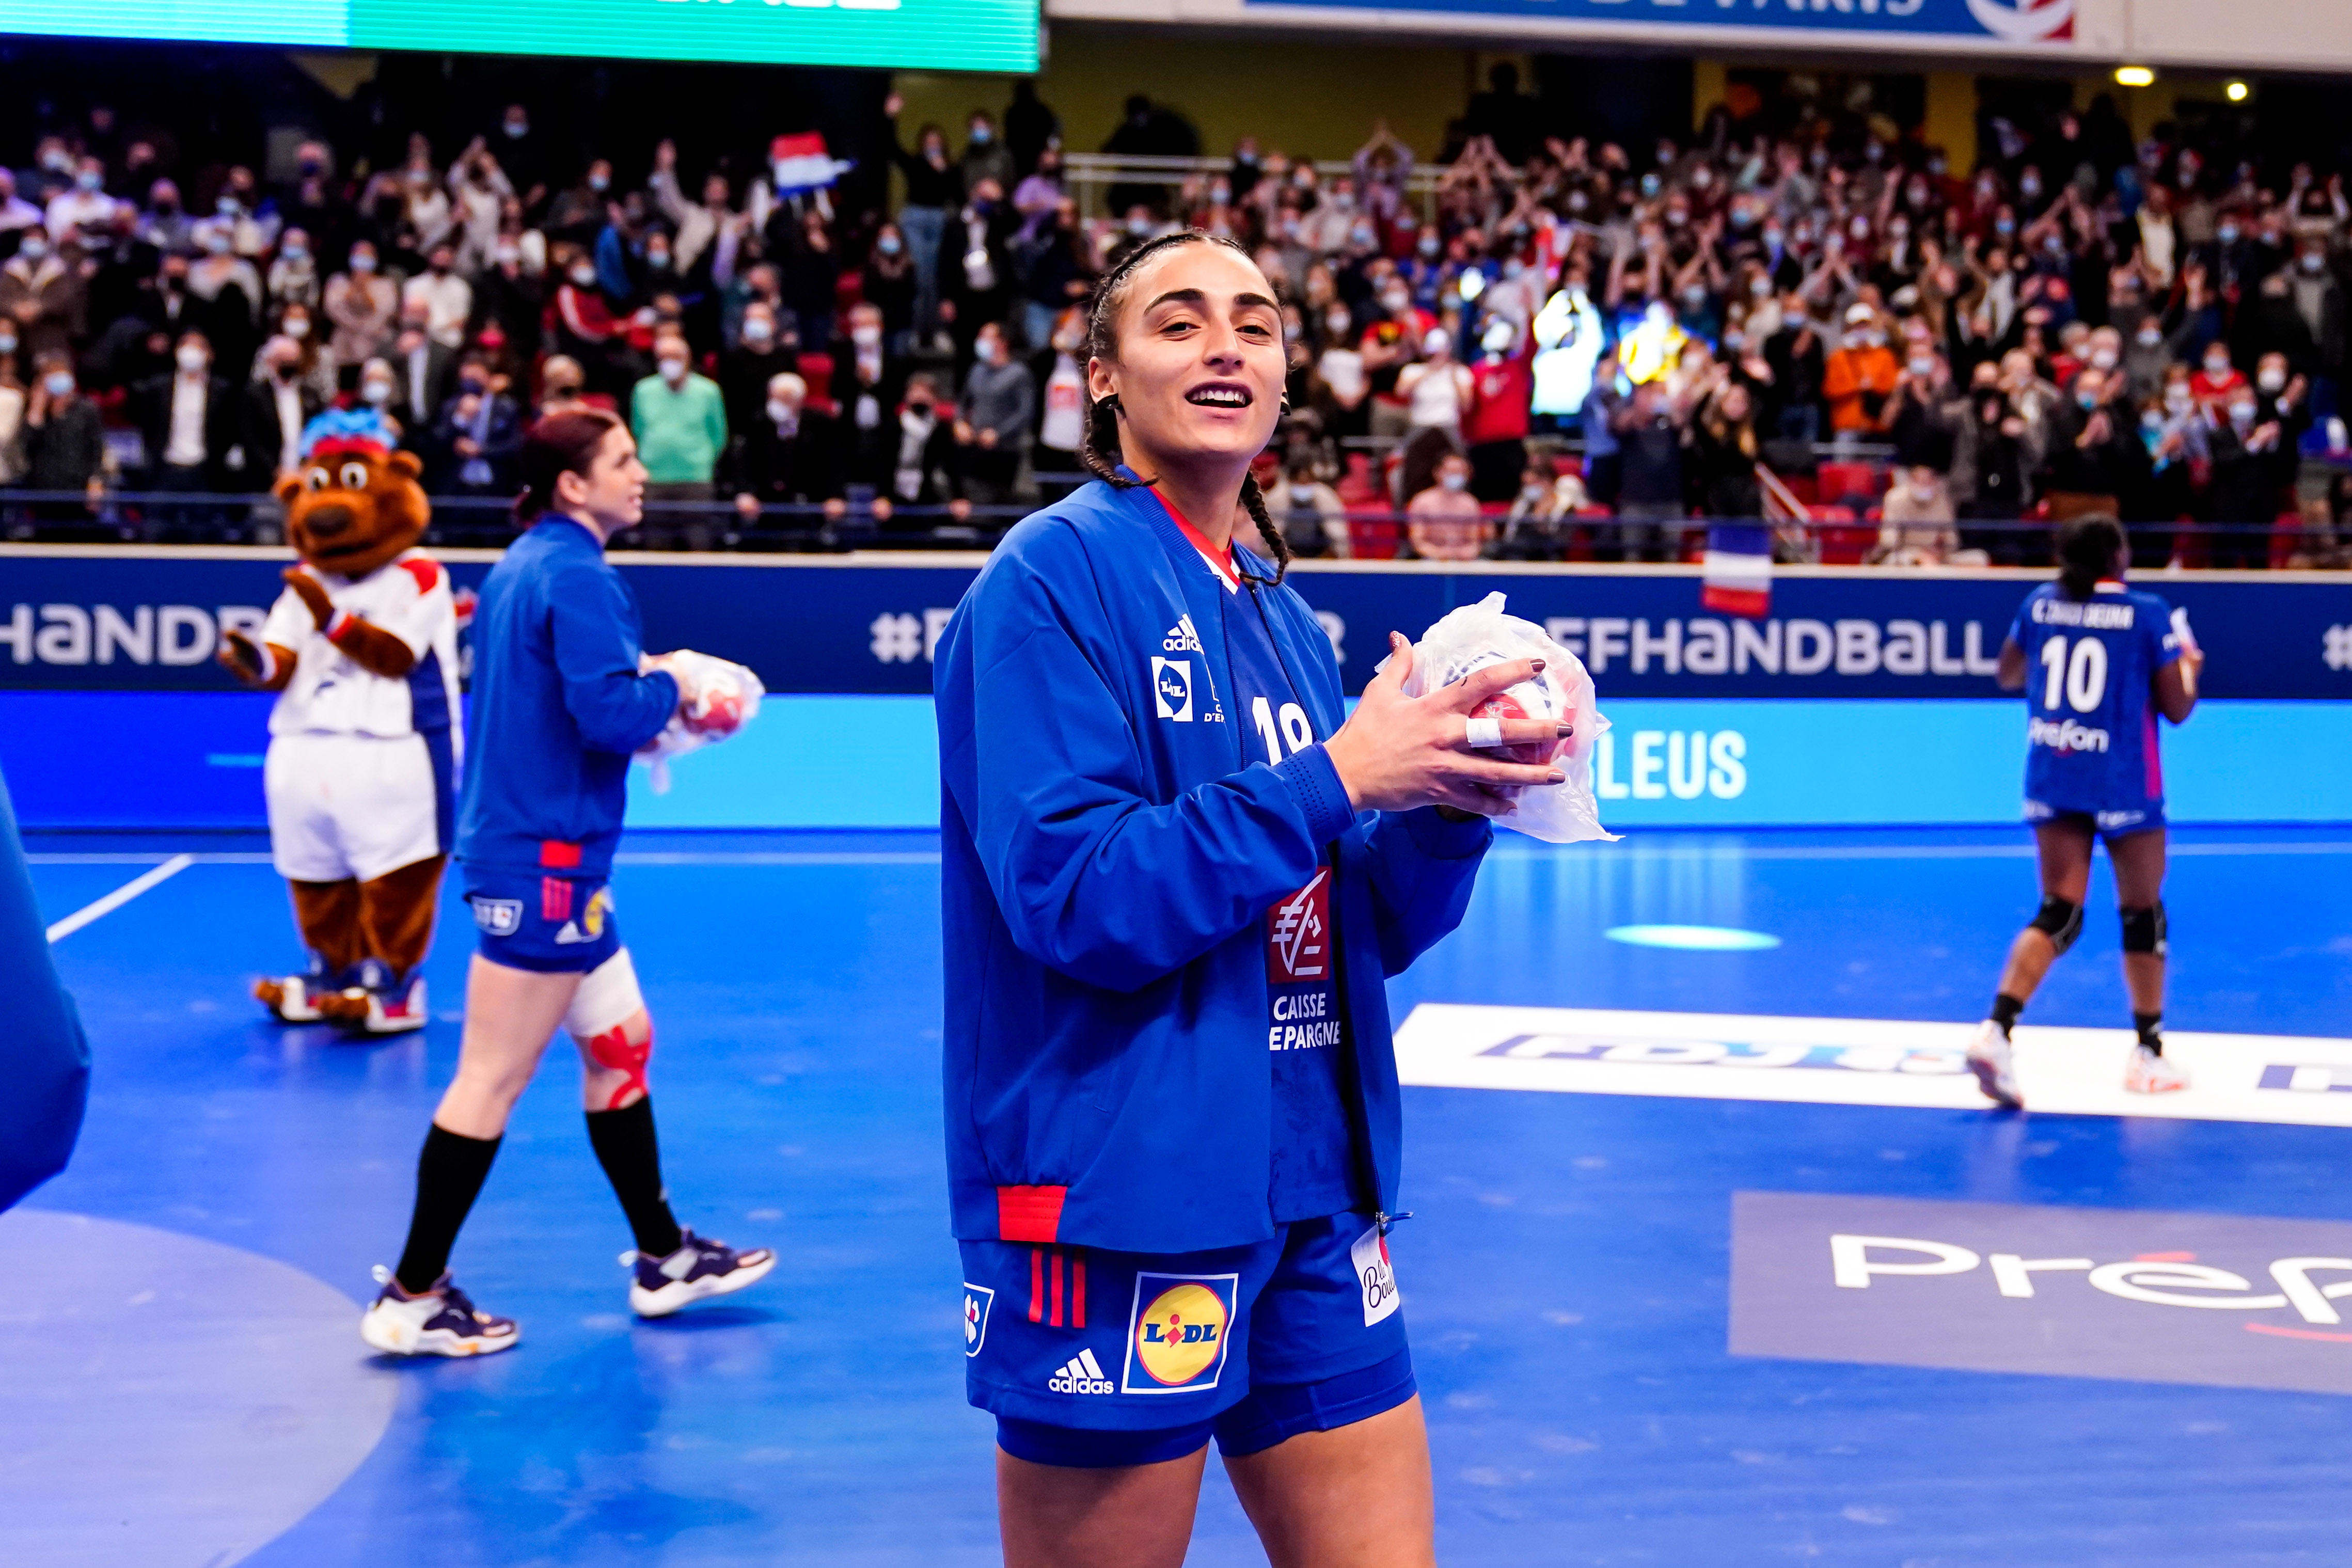 Orlane AHANDA of France during the IFH World Women's Preparation Match 2021 between France and Hungary at Stade Pierre de Coubertin on November 26, 2021 in Paris, France. (Photo by Hugo Pfeiffer/Icon Sport) - Orlane AHANDA - Pierre de Coubertin - Paris (France)